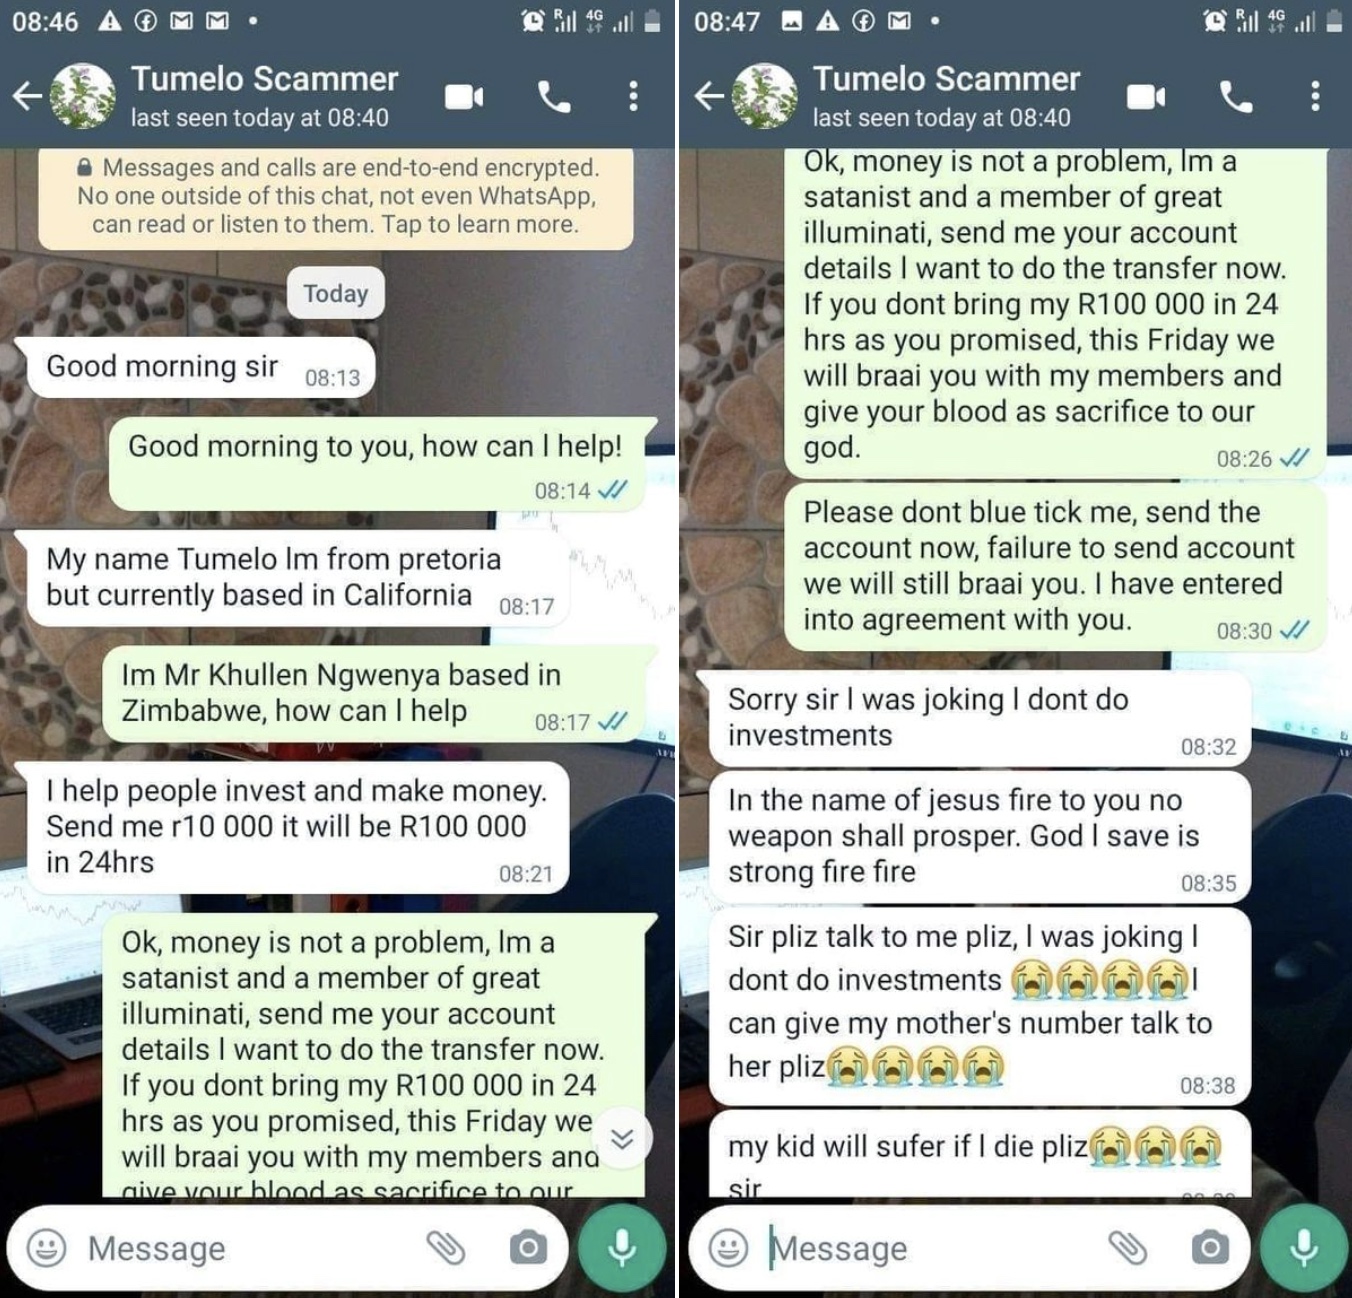 South African's Hilarious Response to Scammer Promises a Braai to Remember!